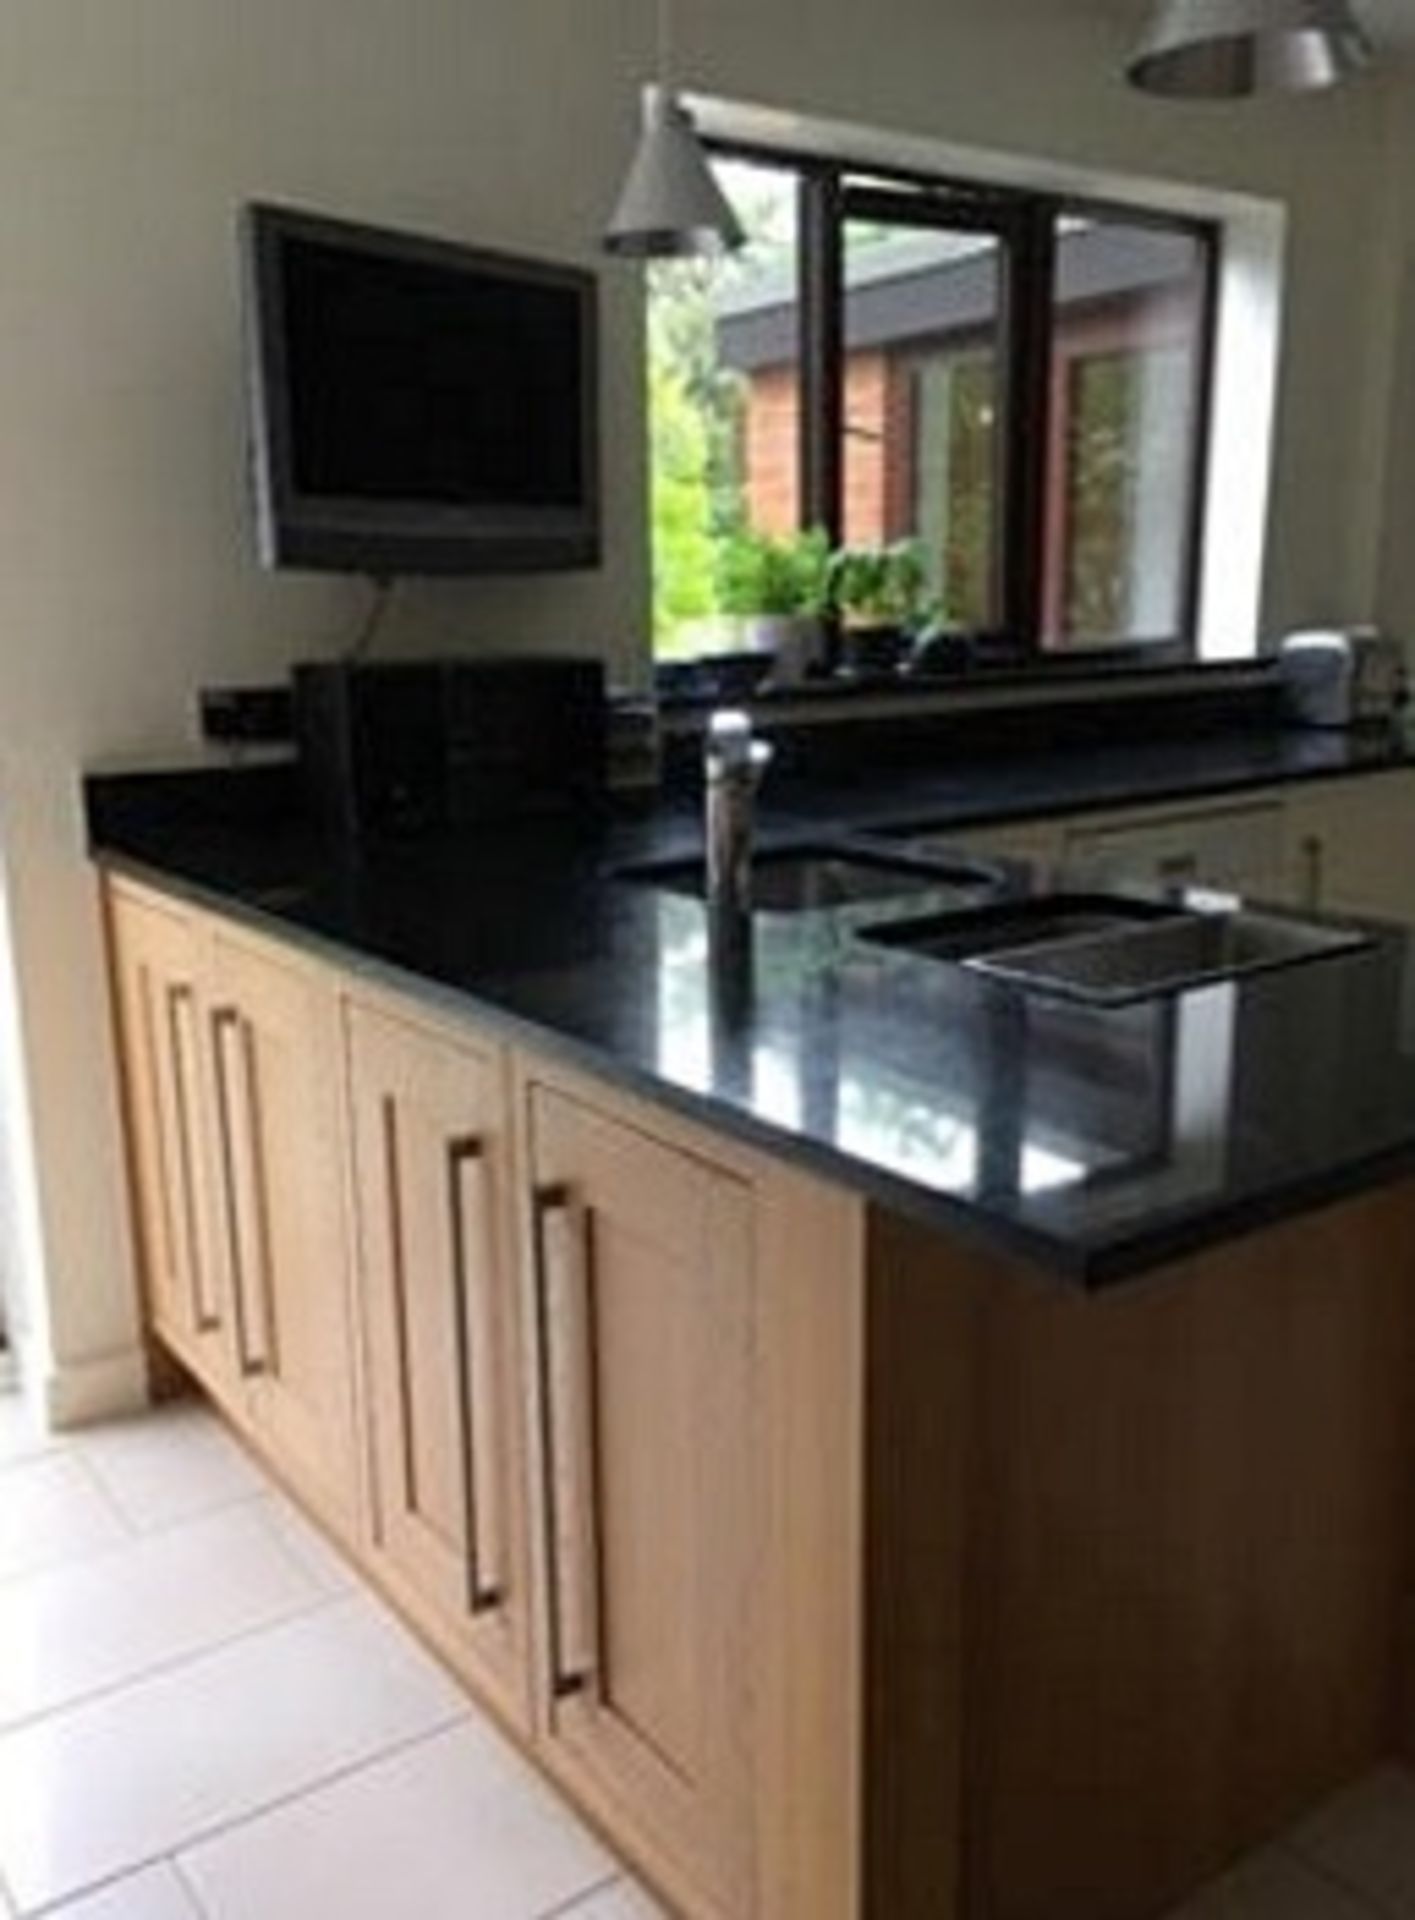 1 x Bespoke Solid Wood Fitted Kitchen With Granite Worktops - Pre-owned In Good Condtion - CL172 - - Image 4 of 22